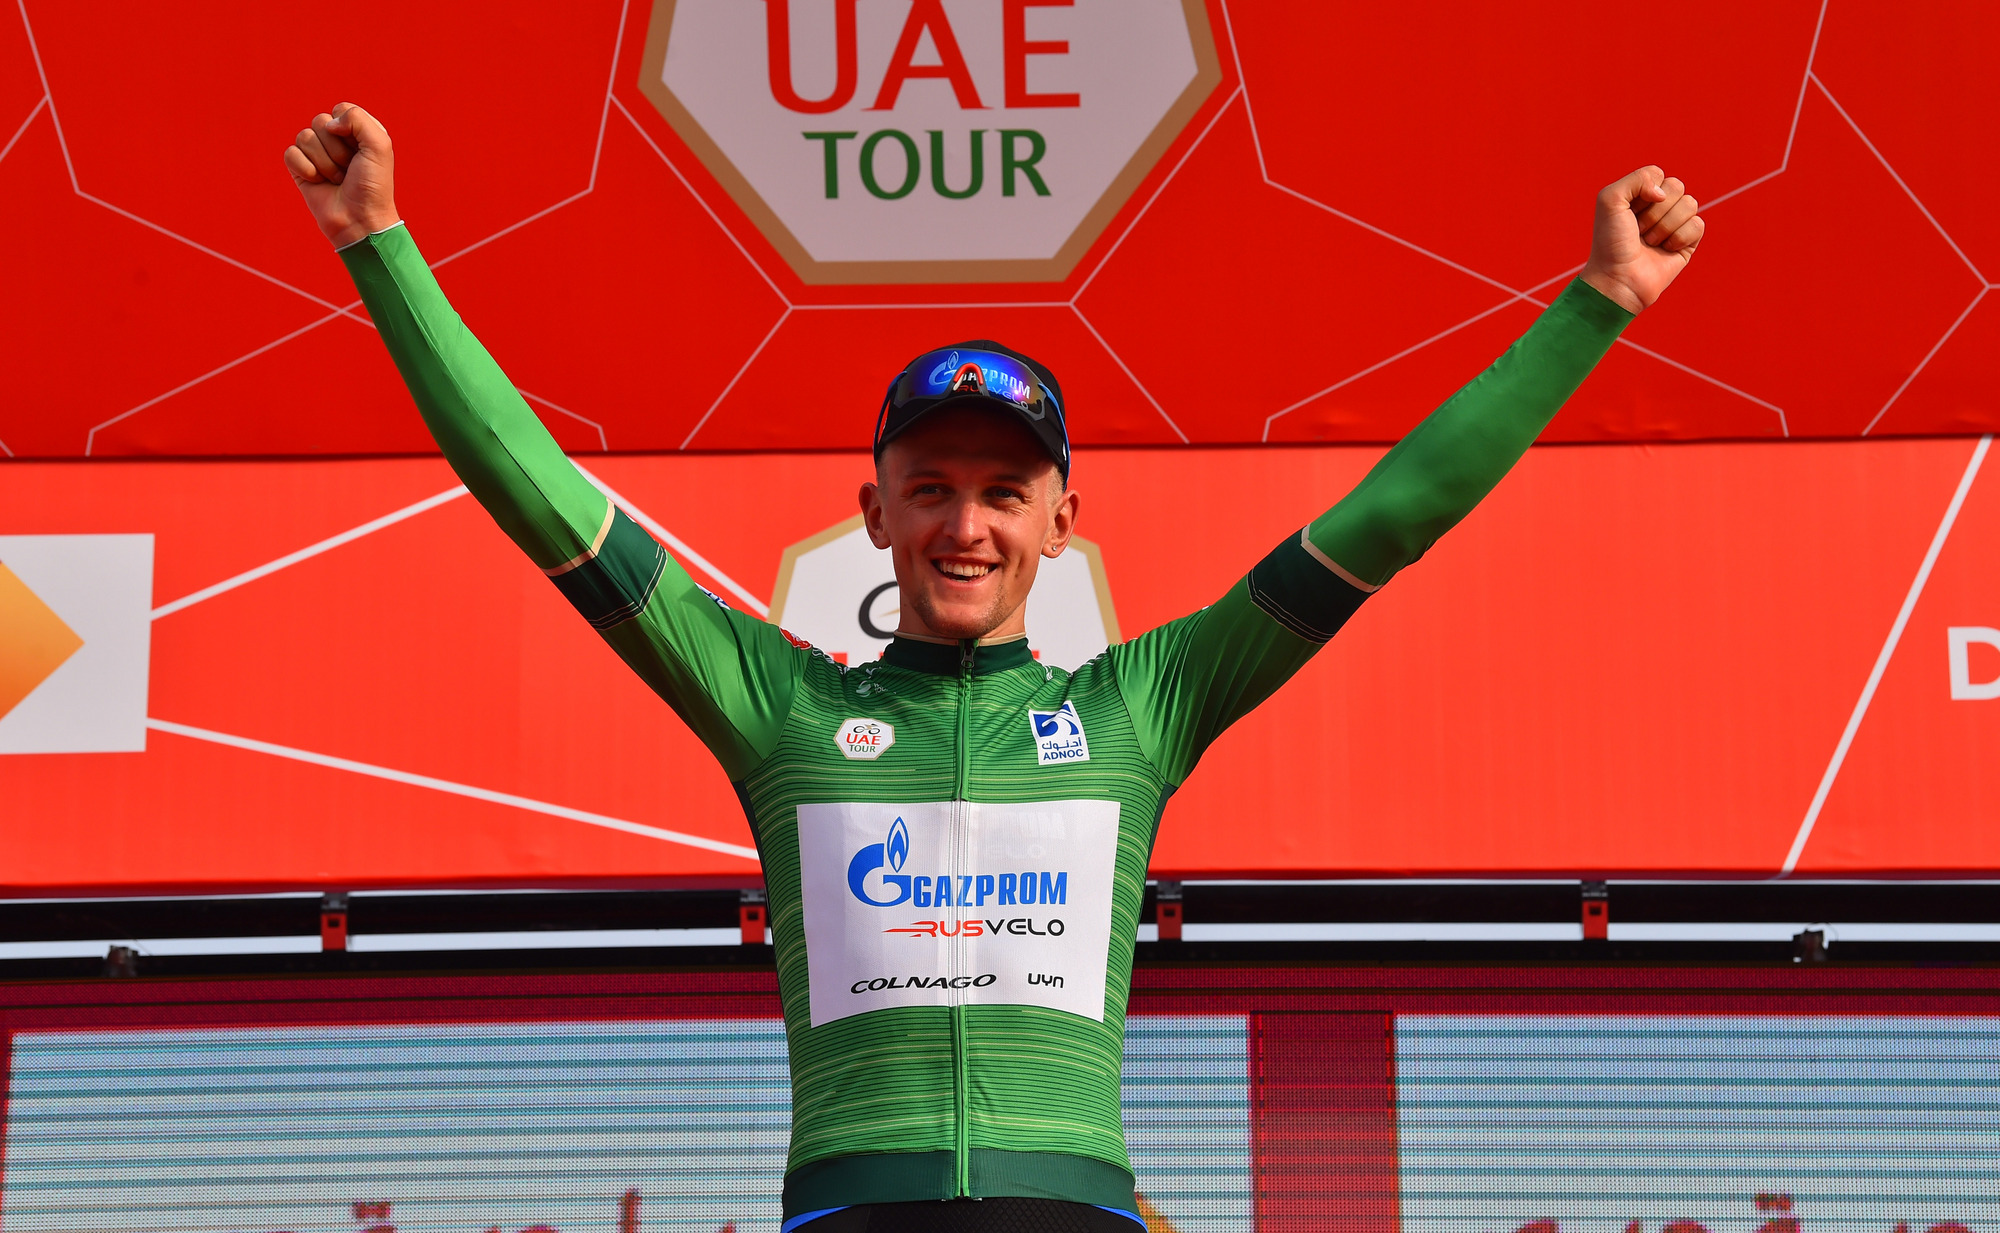 UAE Tour 2019: Stage 4 Results | Cyclingnews